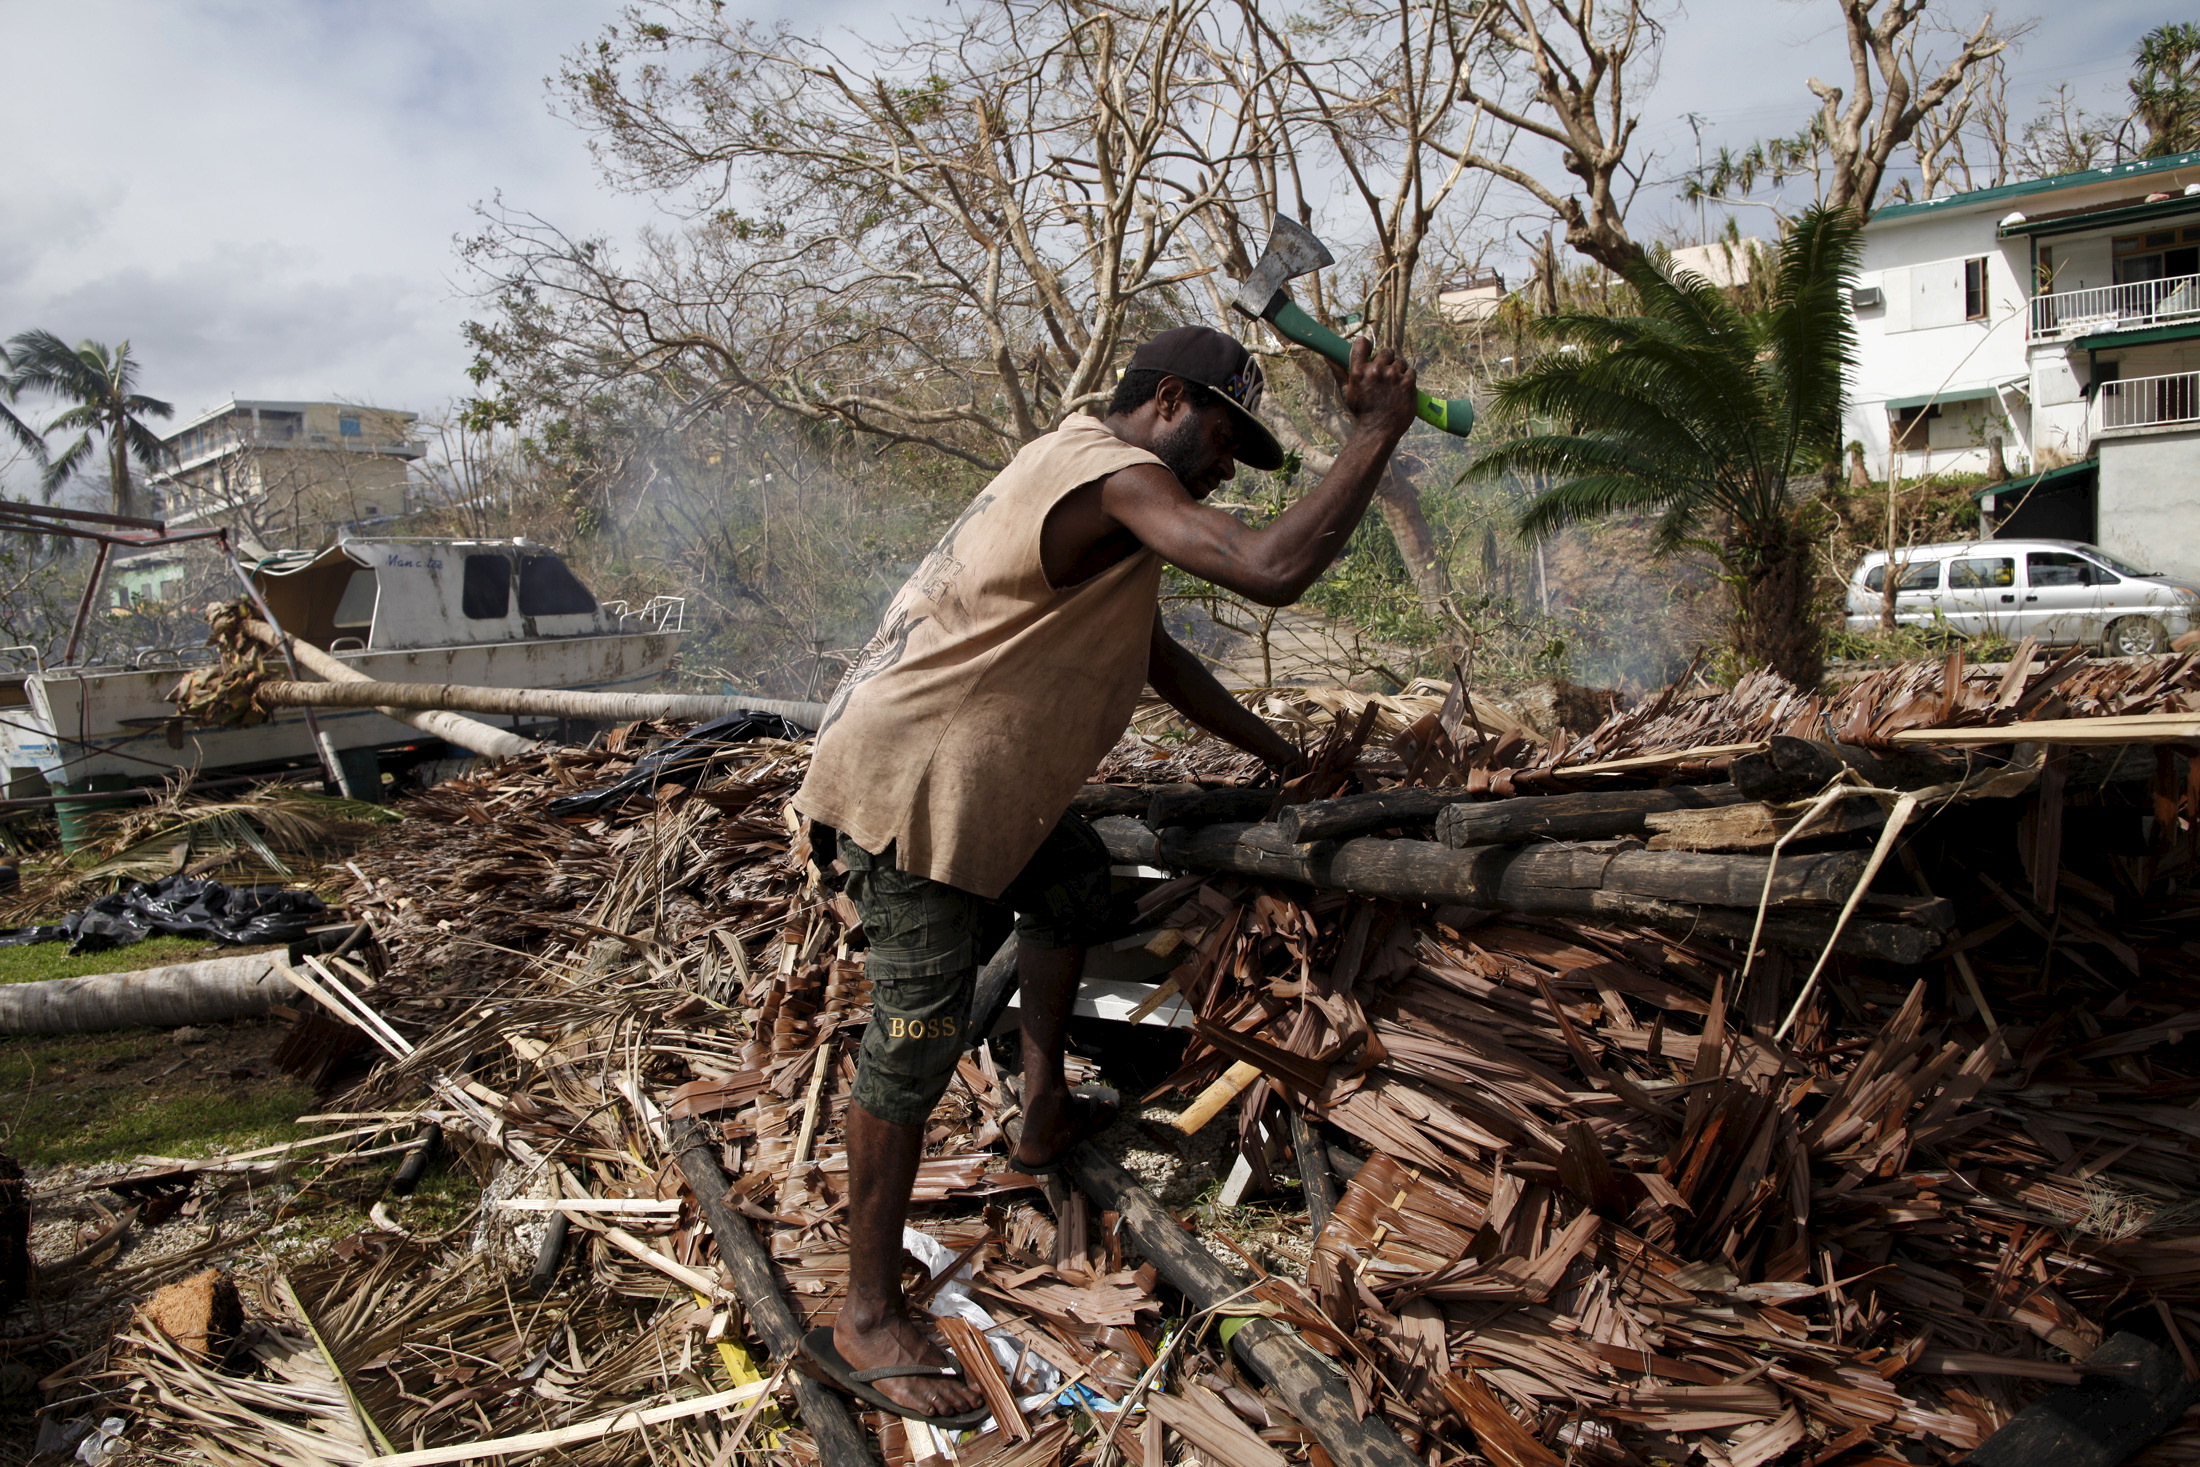 A worker chops up fallen trees next to a destroyed boat at a resident's compound days after Cyclone Pam in Port Vila, capital city of the Pacific island nation of Vanuatu March 19, 2015.